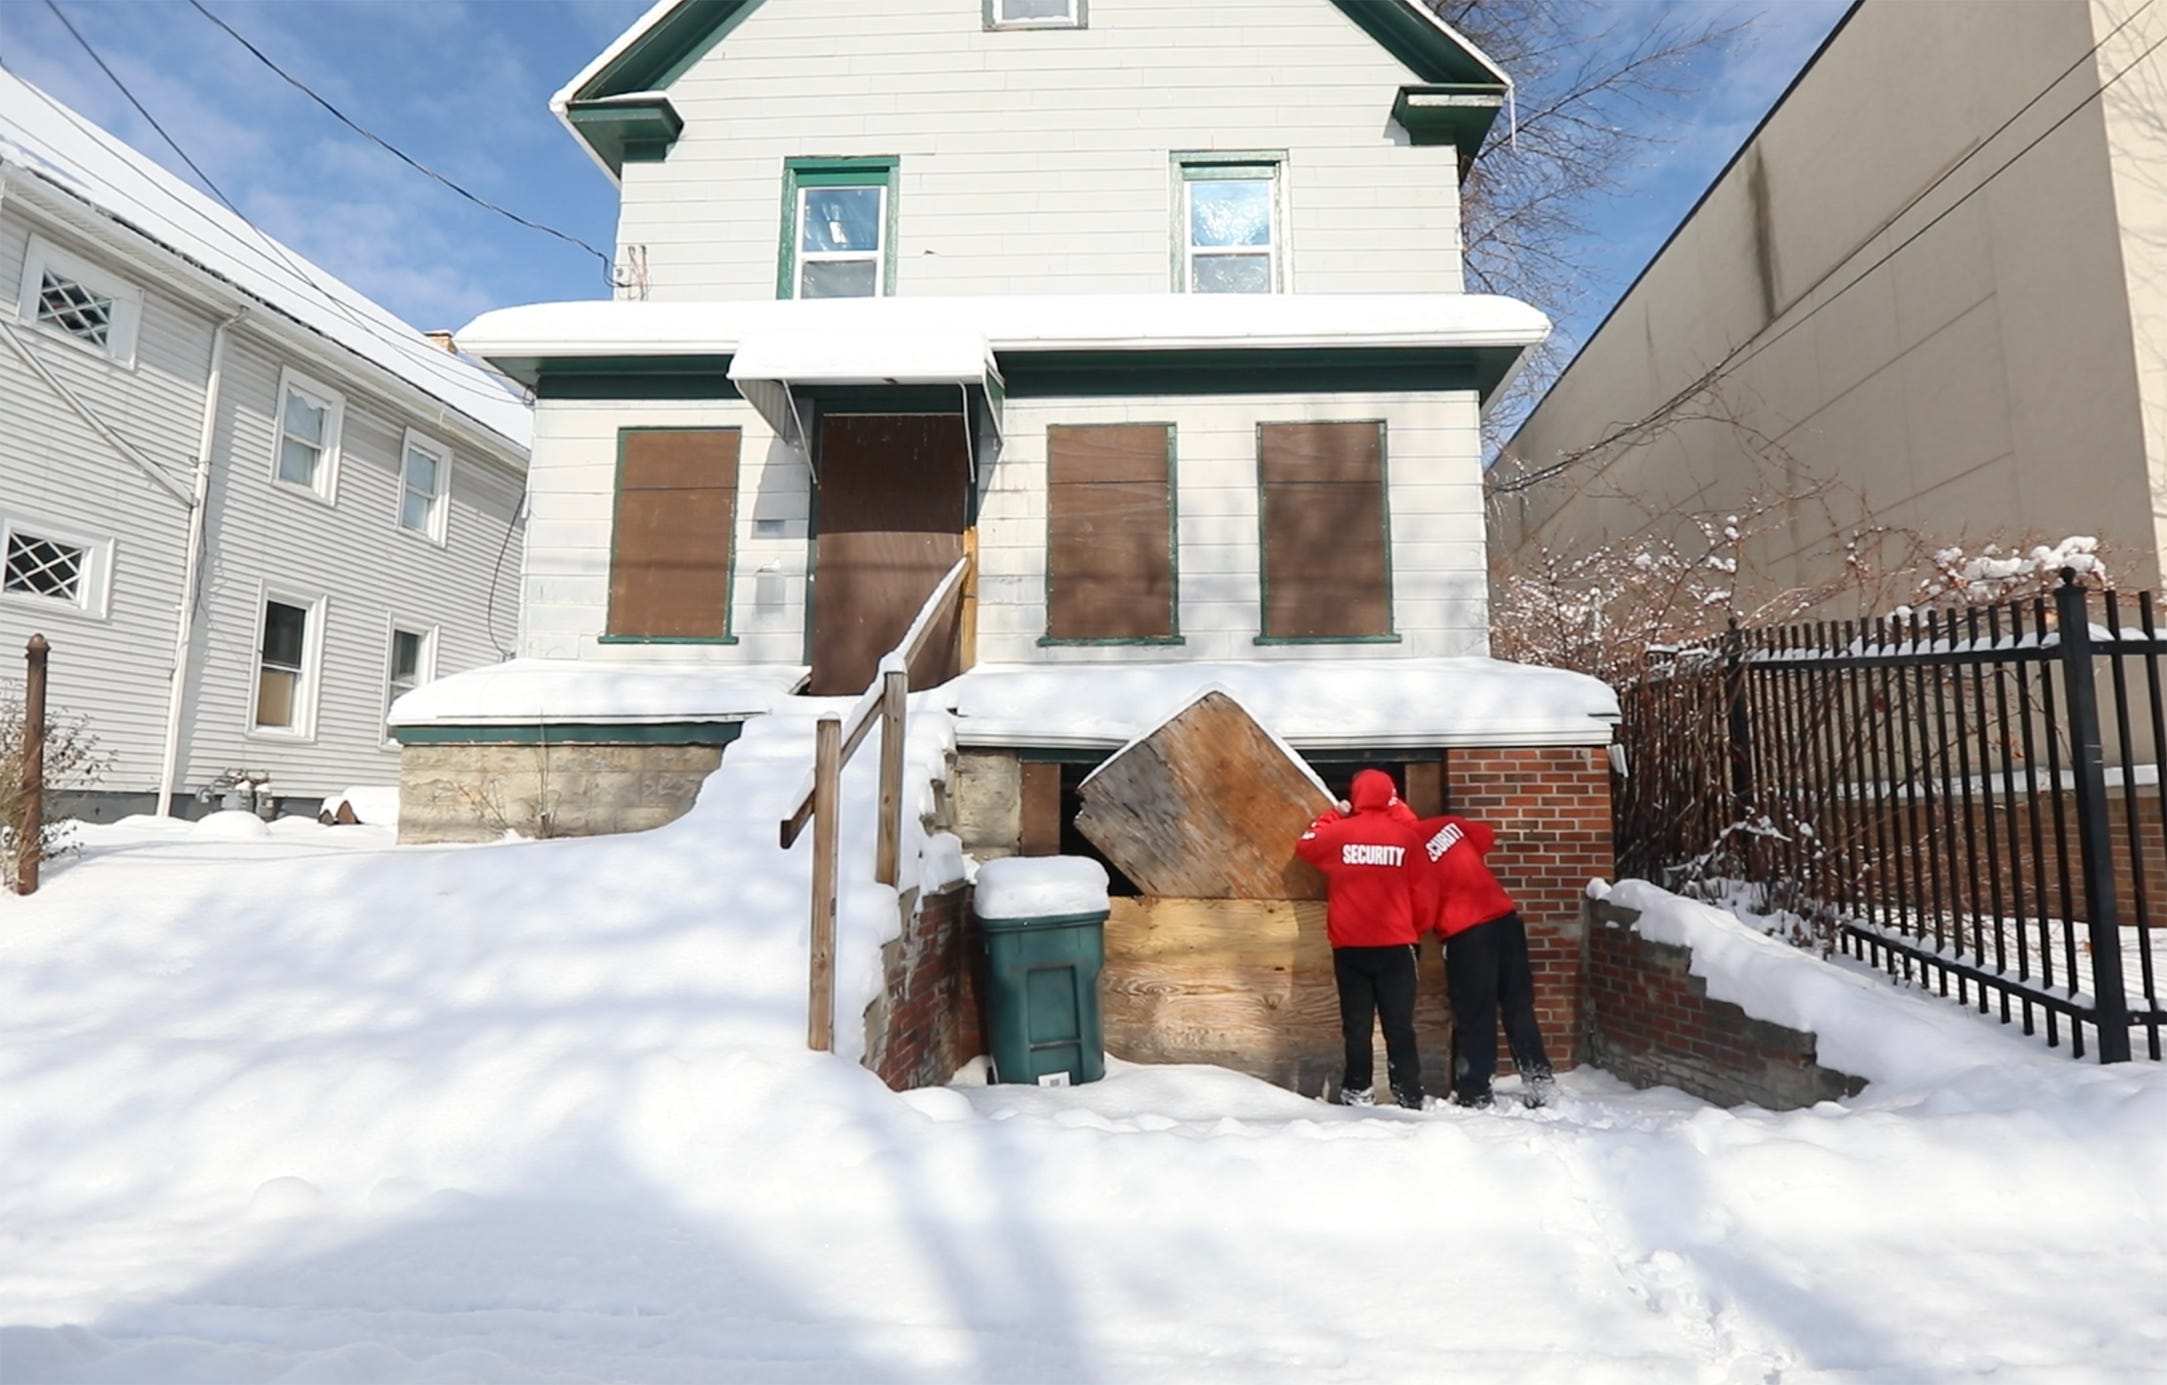 Gary Harding and Donny Huss, volunteers with Hope Dealers, check an abandoned house to see if there are signs of people going inside to live or use drugs.